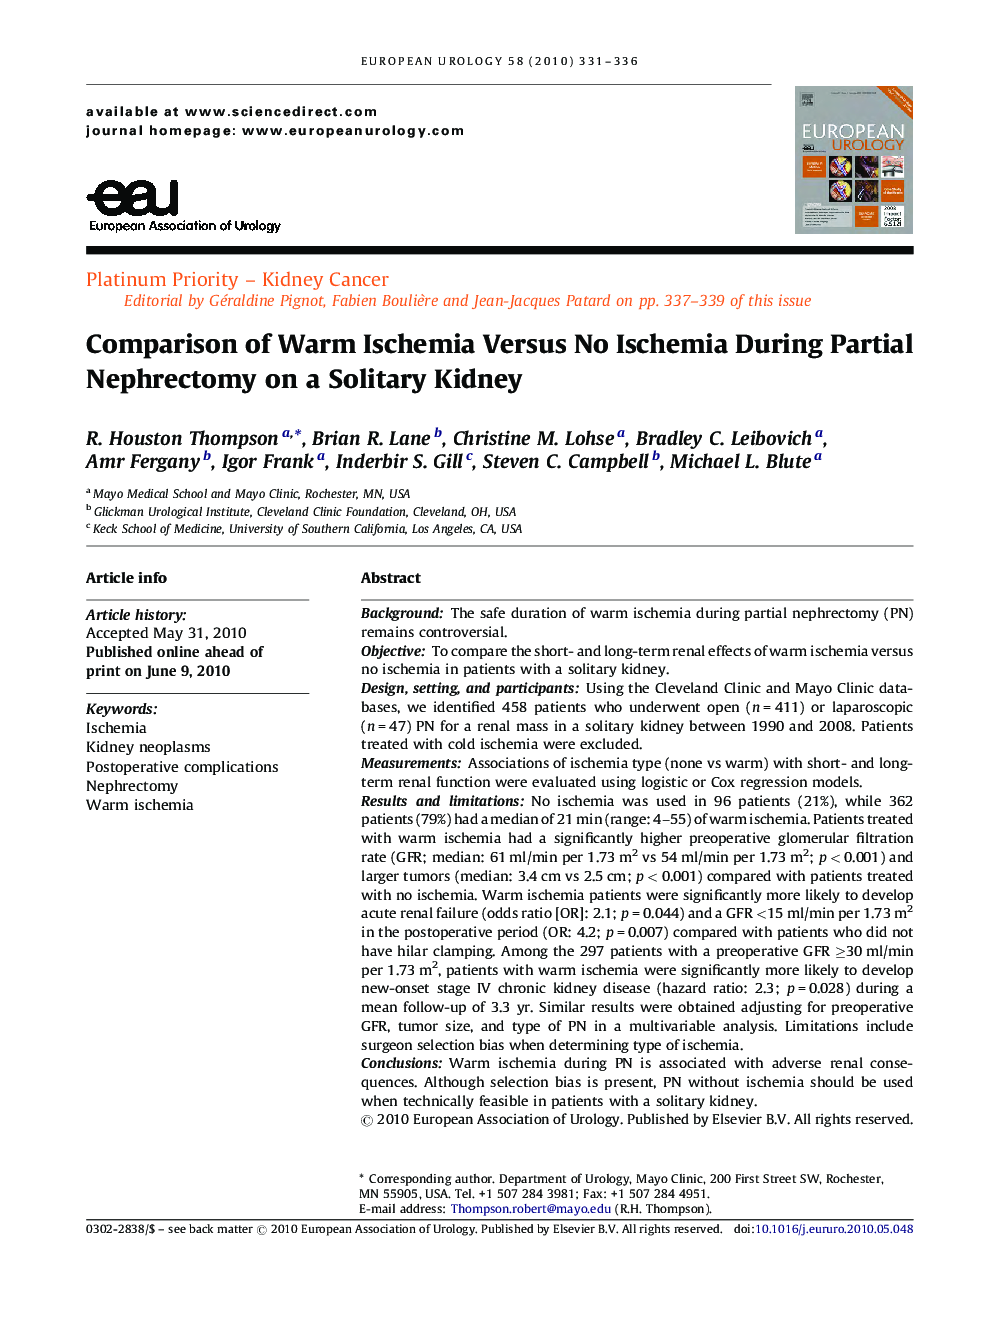 Comparison of Warm Ischemia Versus No Ischemia During Partial Nephrectomy on a Solitary Kidney